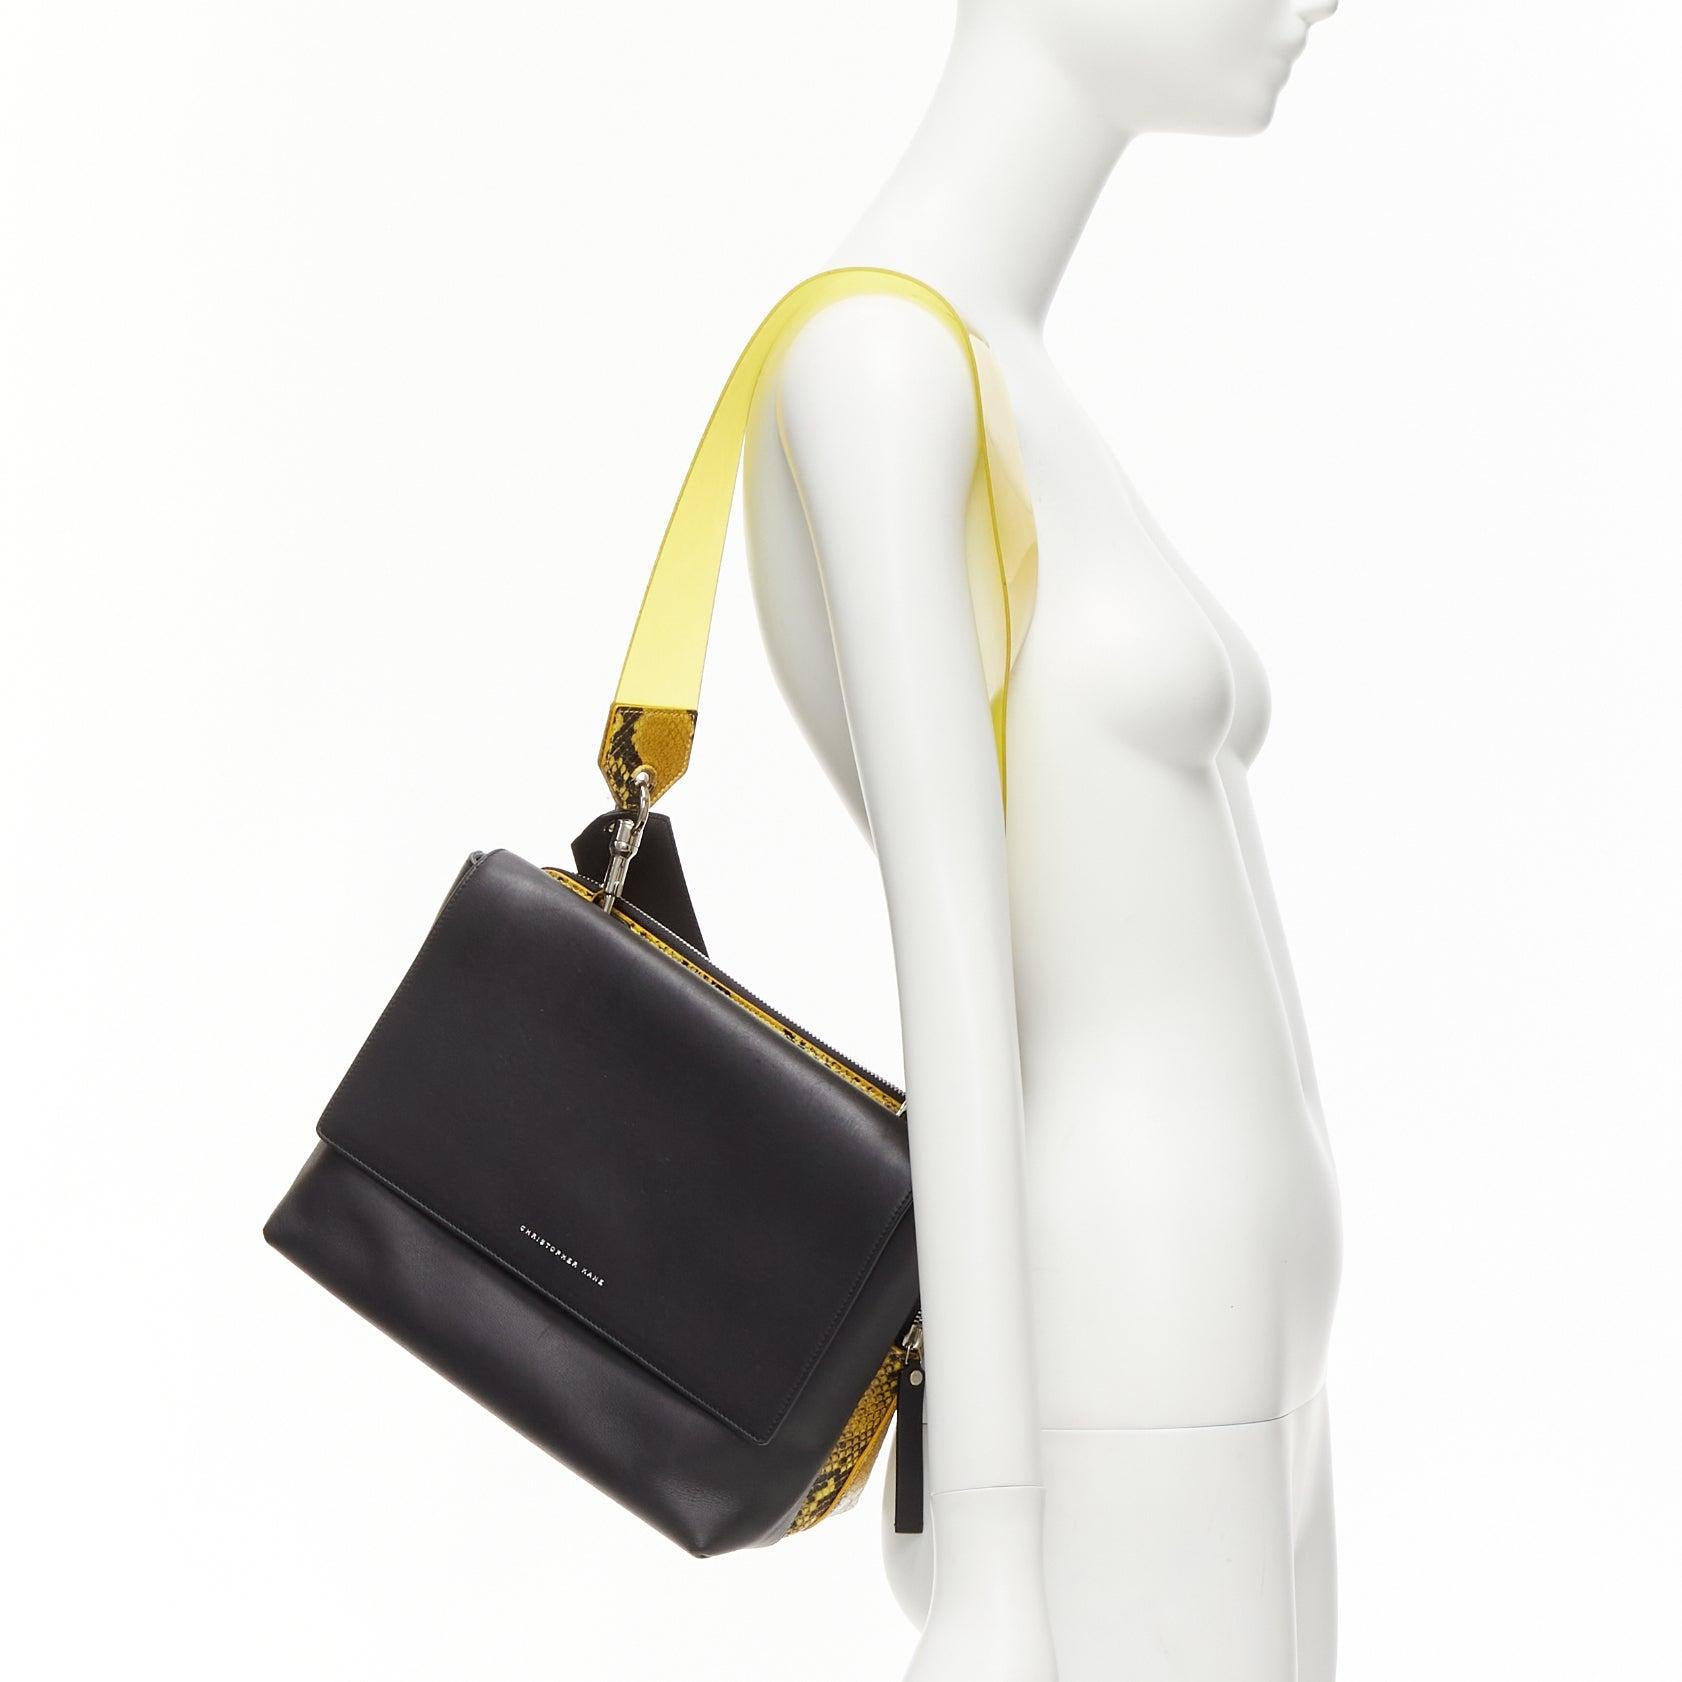 CHRISTOPHER KANE Dual black yellow scaled leather plastic strap reversible bag
Reference: NKLL/A00238
Brand: Christopher Kane
Model: Dual
Material: Leather, Metal
Color: Black, Yellow
Pattern: Animal Print
Closure: Snap Buttons
Lining: Black